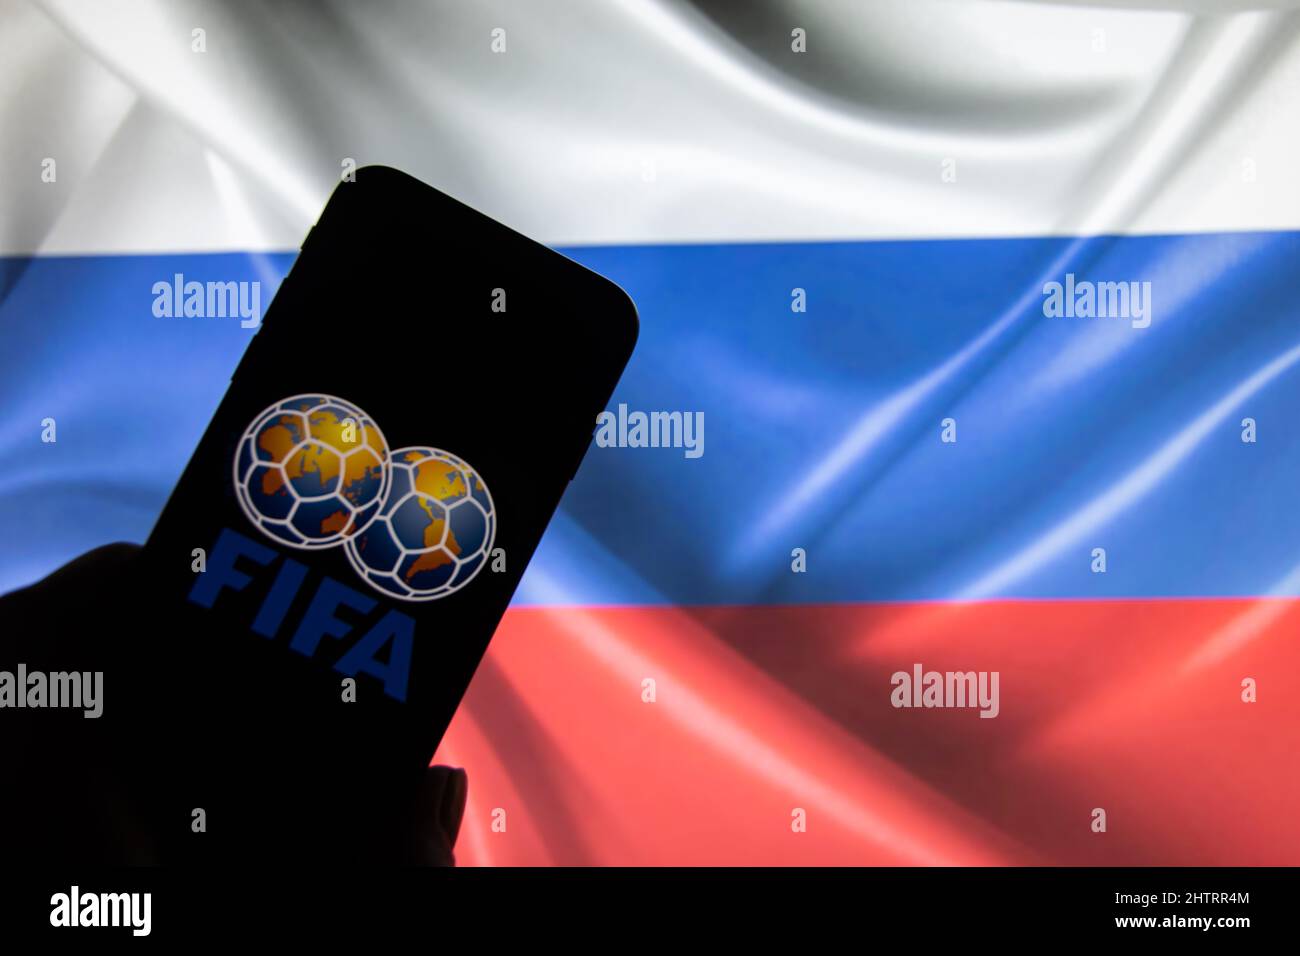 Rheinbach, Germany  4 March 2022,  The 'FIFA' brand logo on a smartphone display in front of a Russian flag (focus on the brand logo) Stock Photo